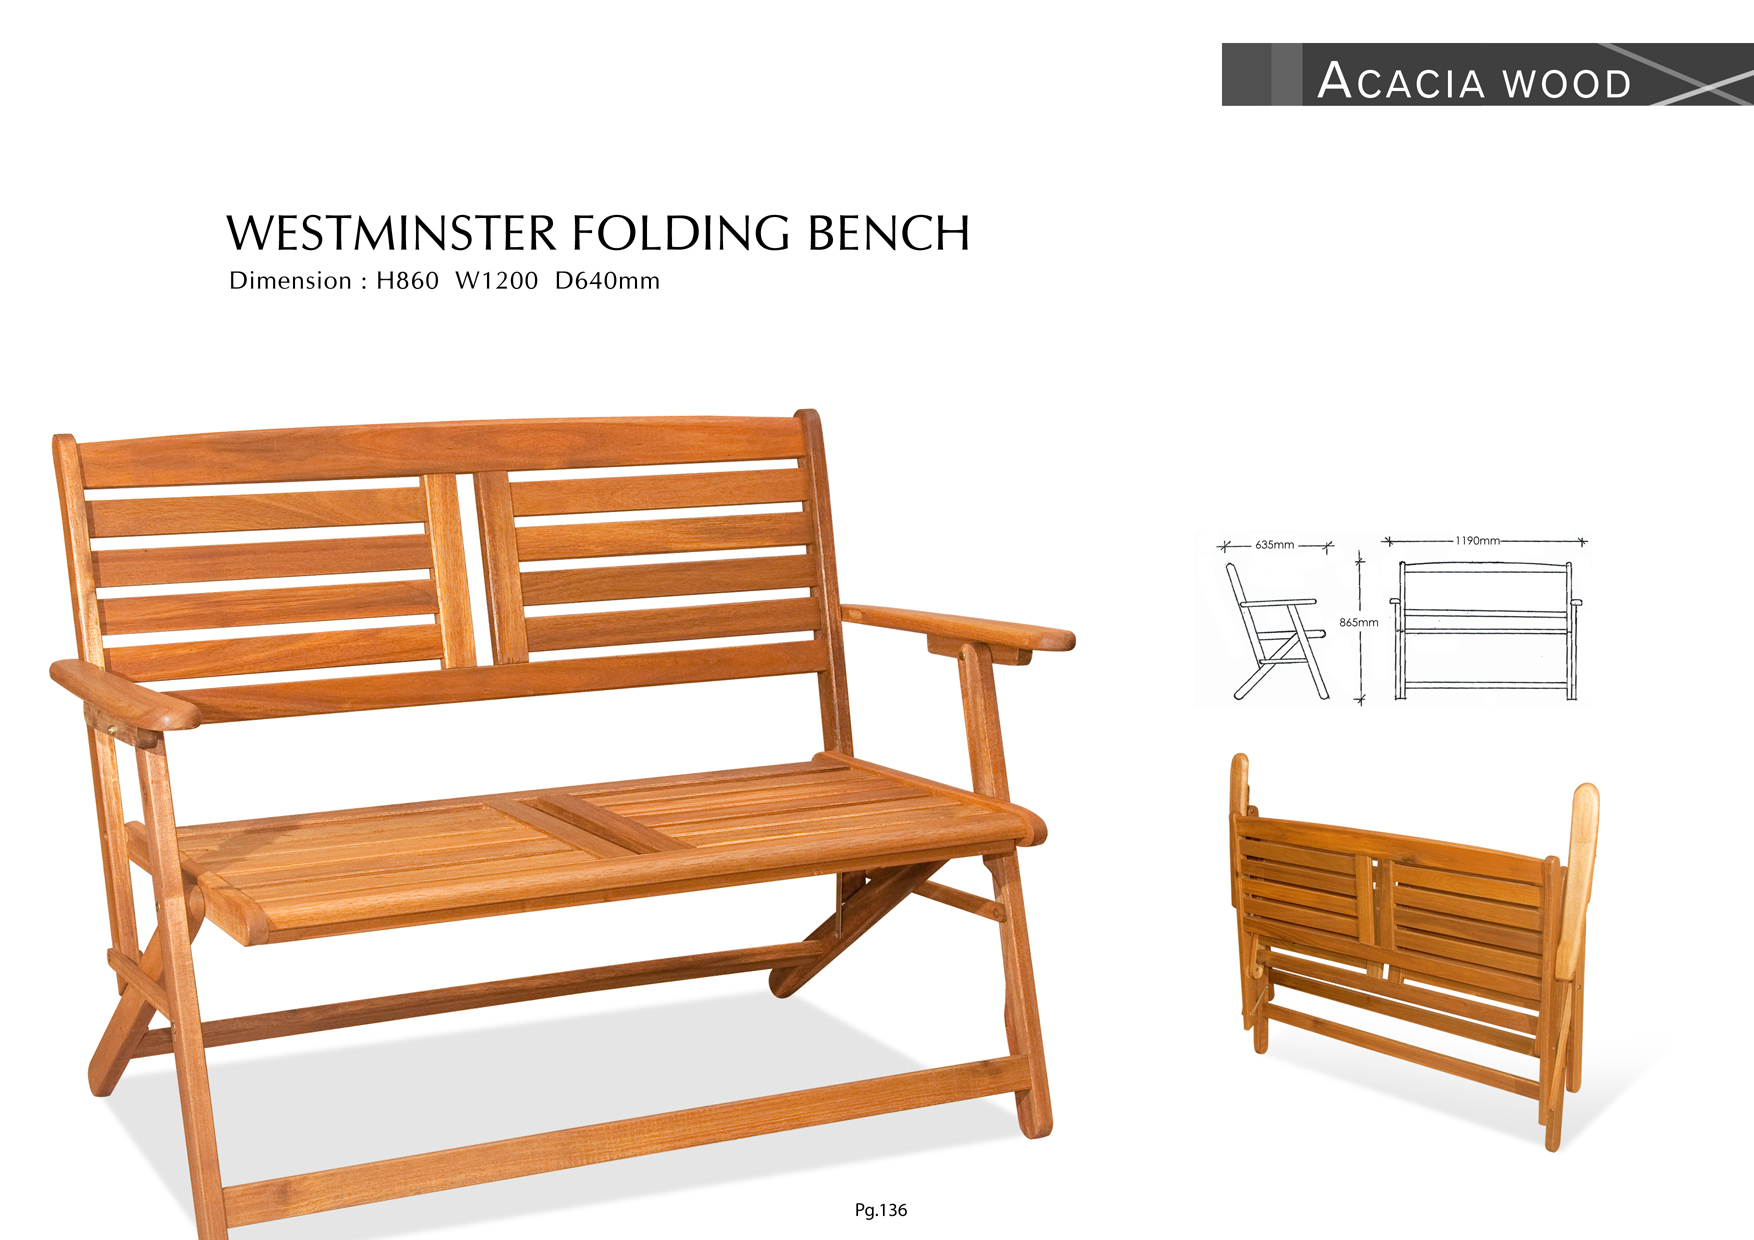 Product: PG136. WESTMINSTER FOLDING BENCH